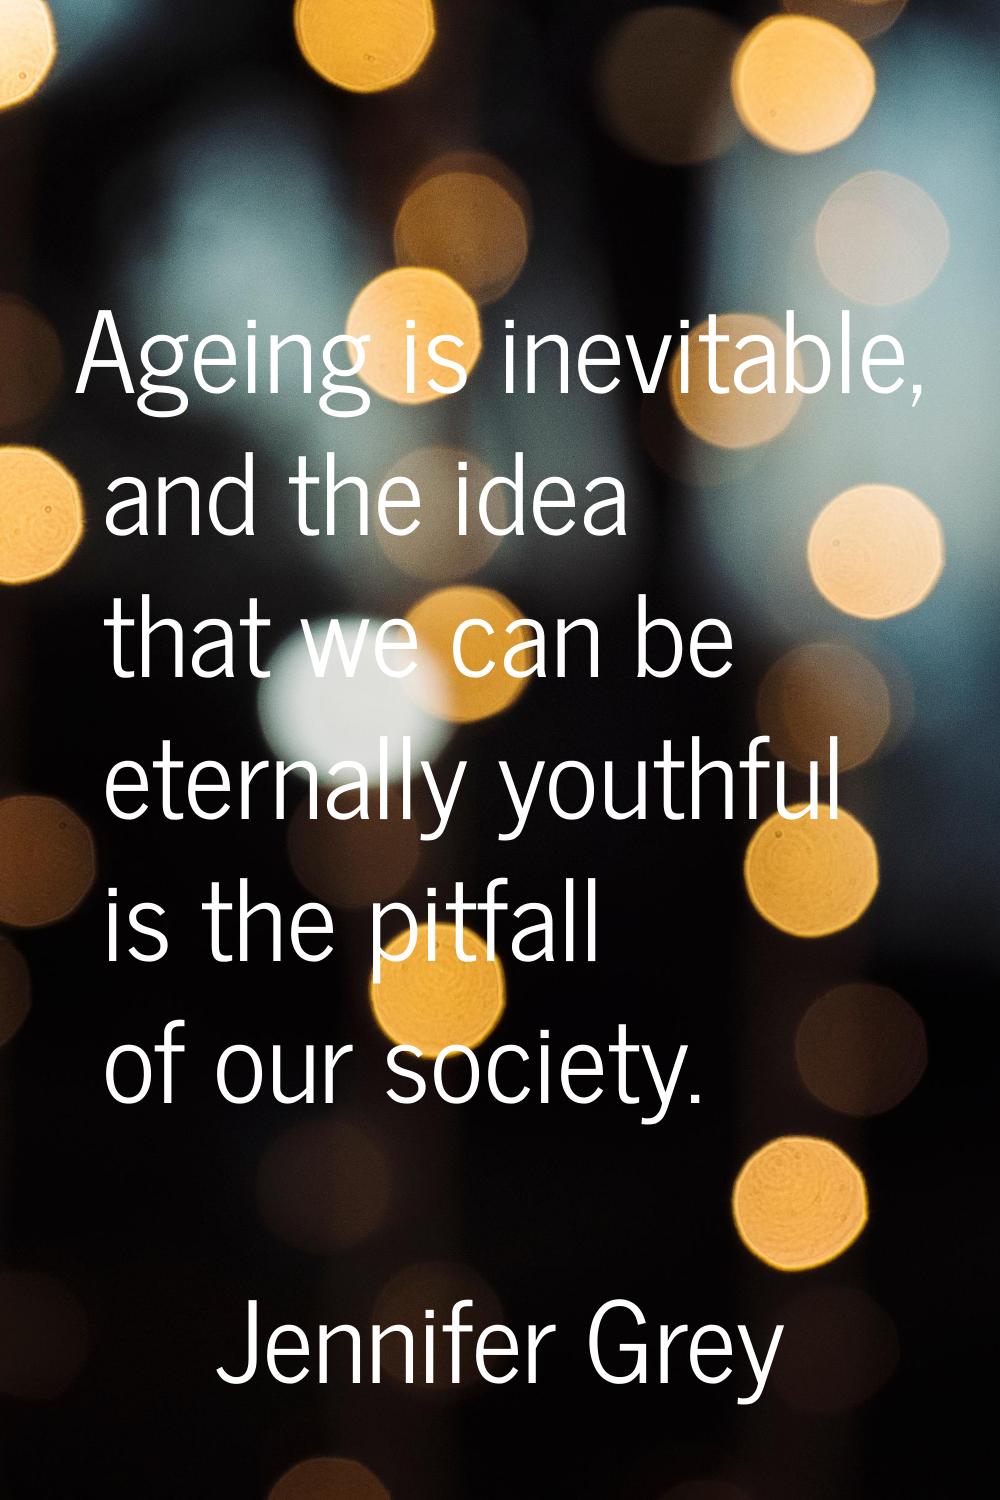 Ageing is inevitable, and the idea that we can be eternally youthful is the pitfall of our society.